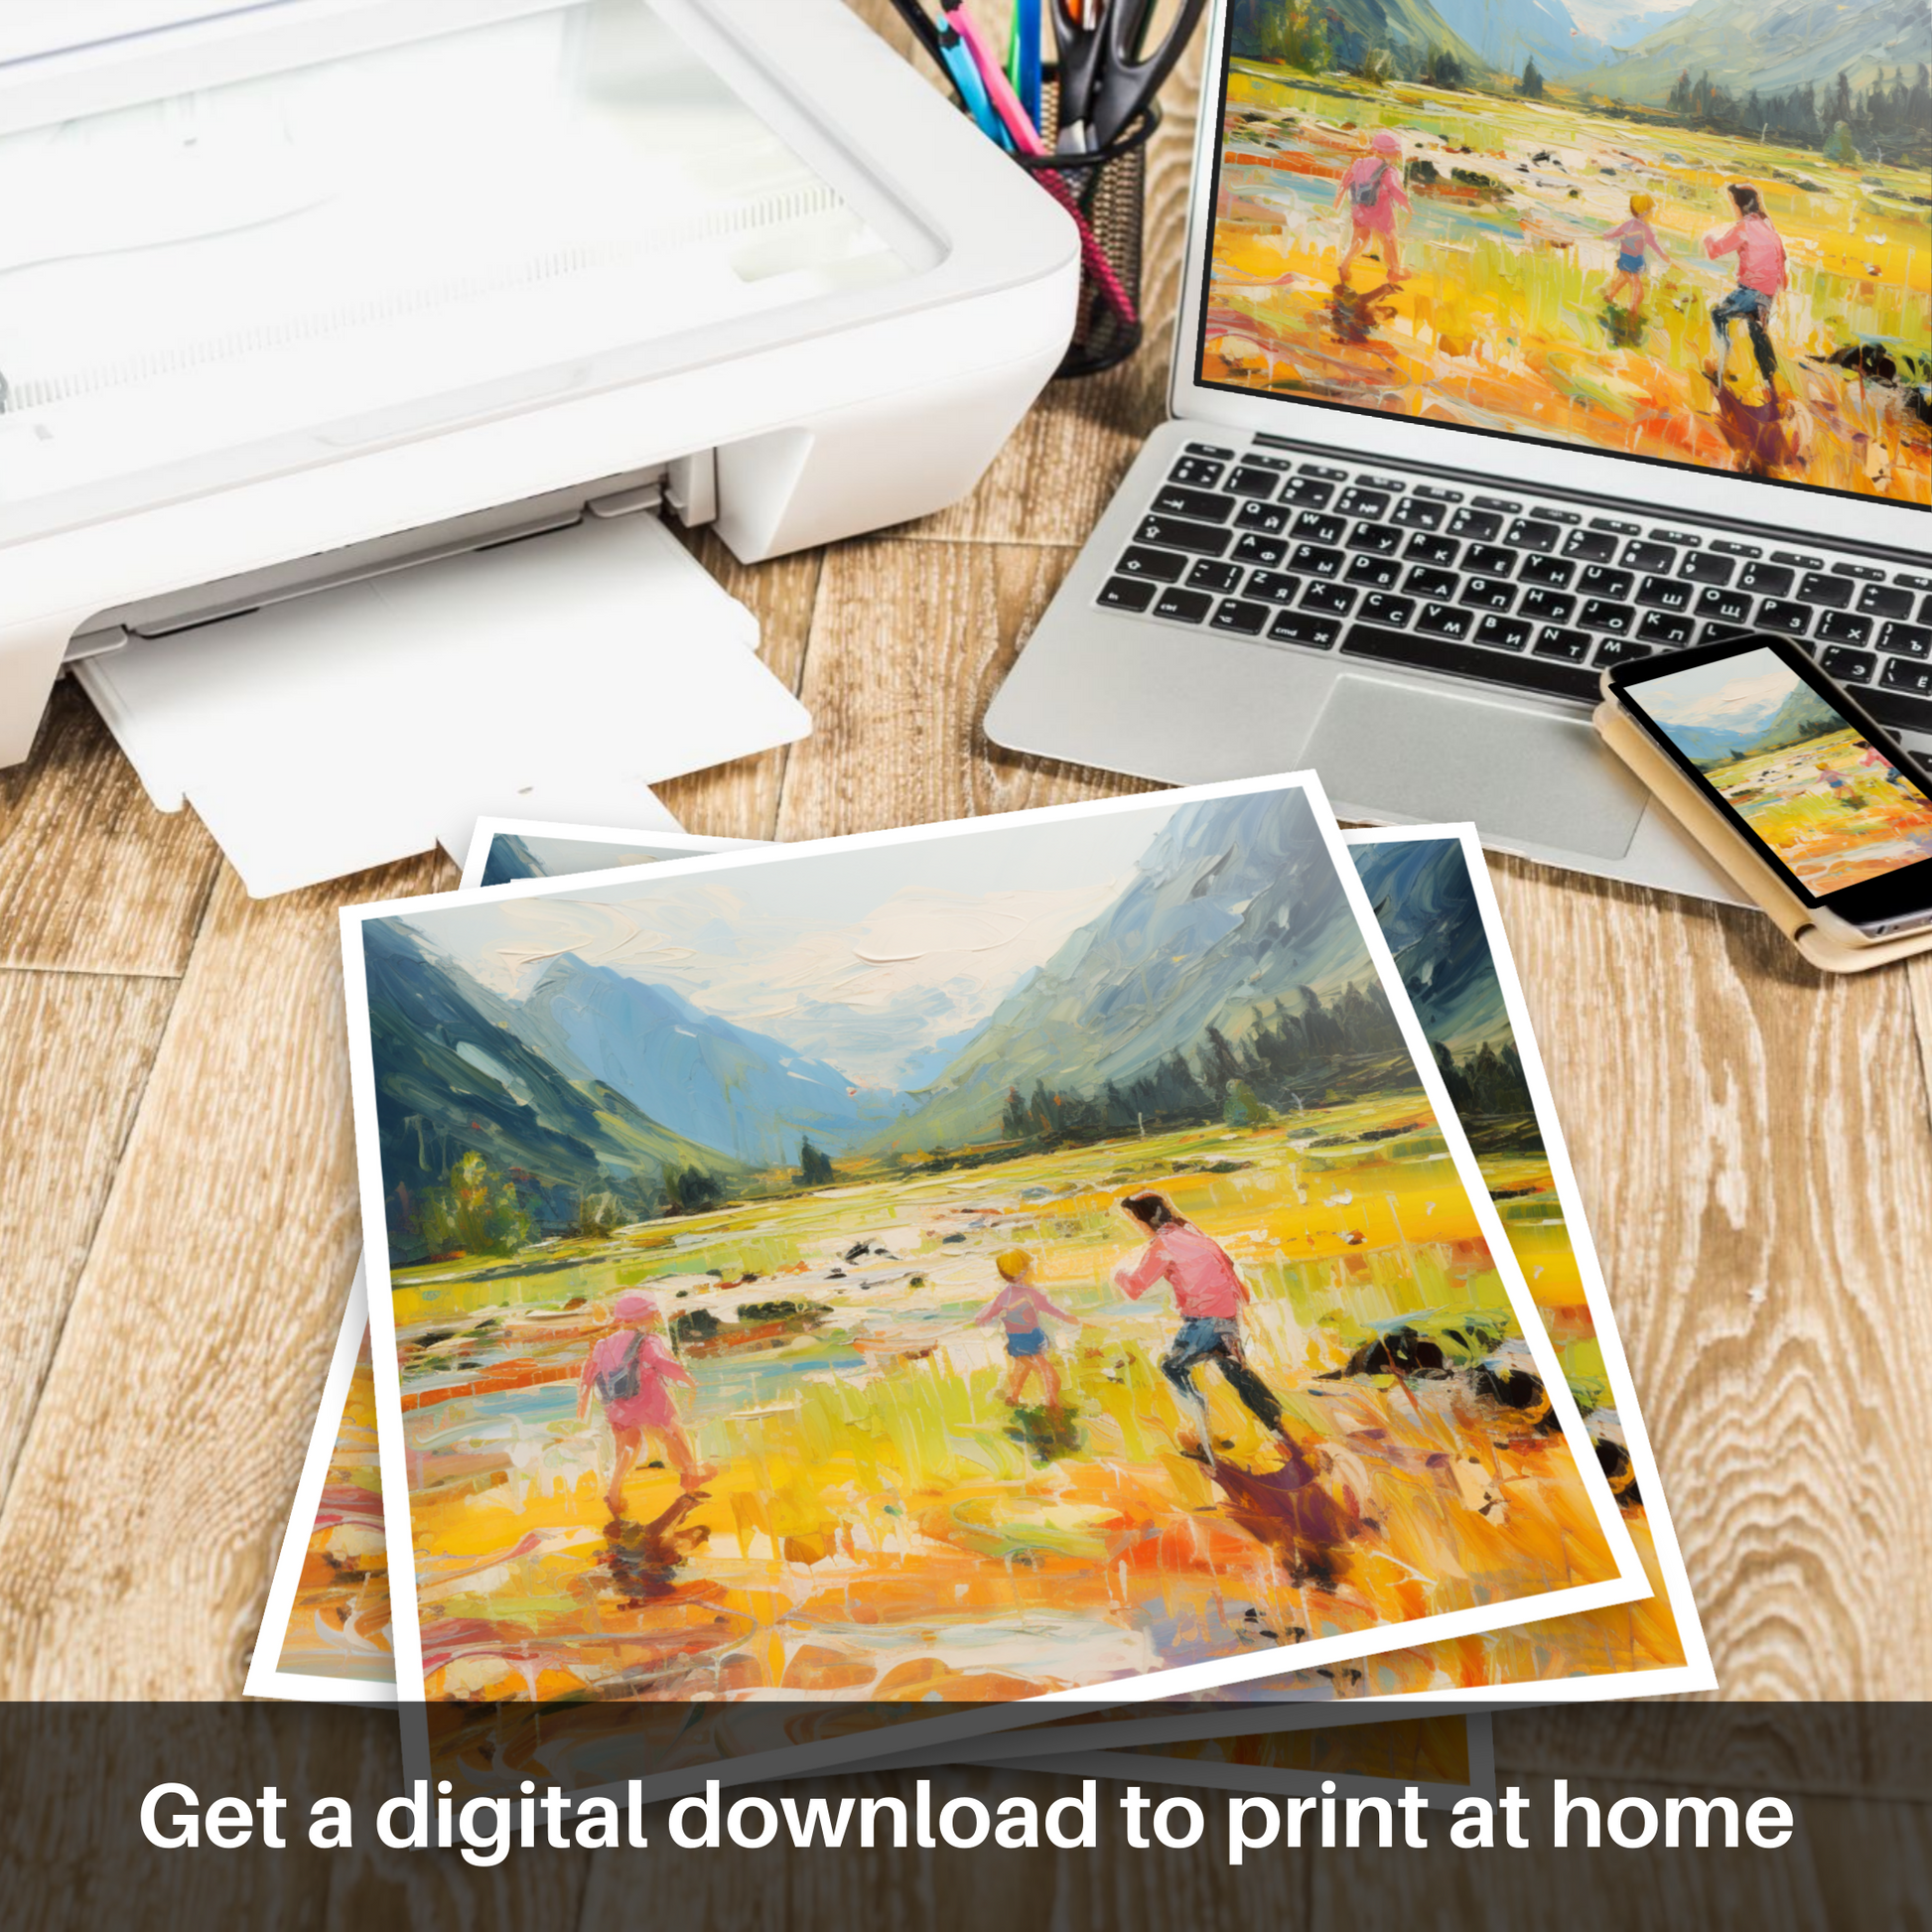 Downloadable and printable picture of Children playing in Glencoe during summer